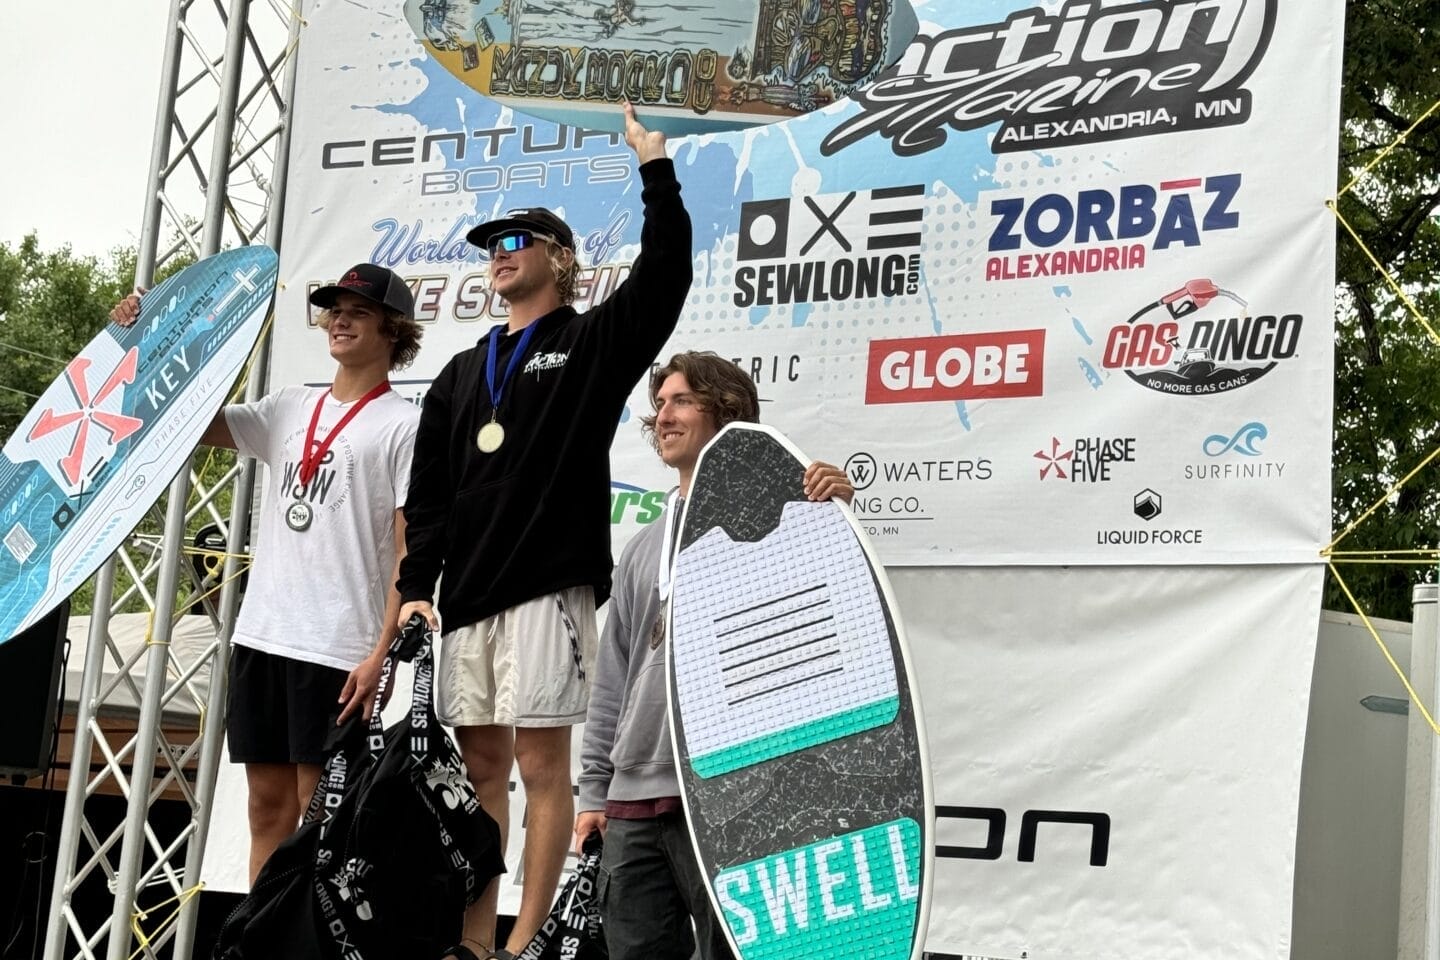 Three individuals stand on a podium holding awards at a surfing competition. The backdrop features various sponsor logos and a banner that reads 